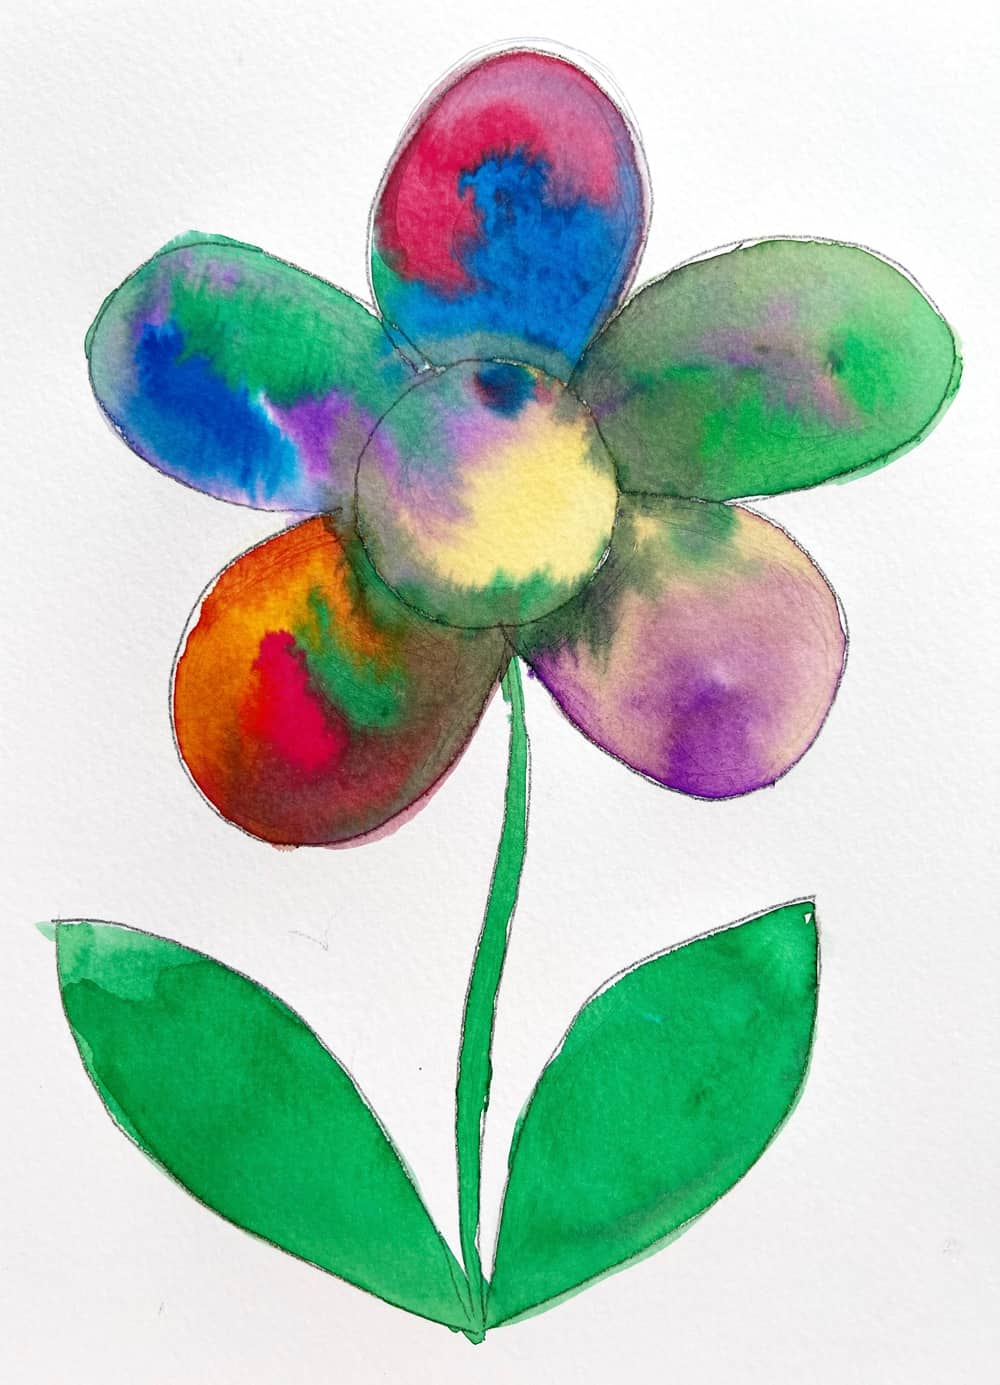 14+ Easy Watercolor Painting Ideas to Inspire You - Clementine Creative